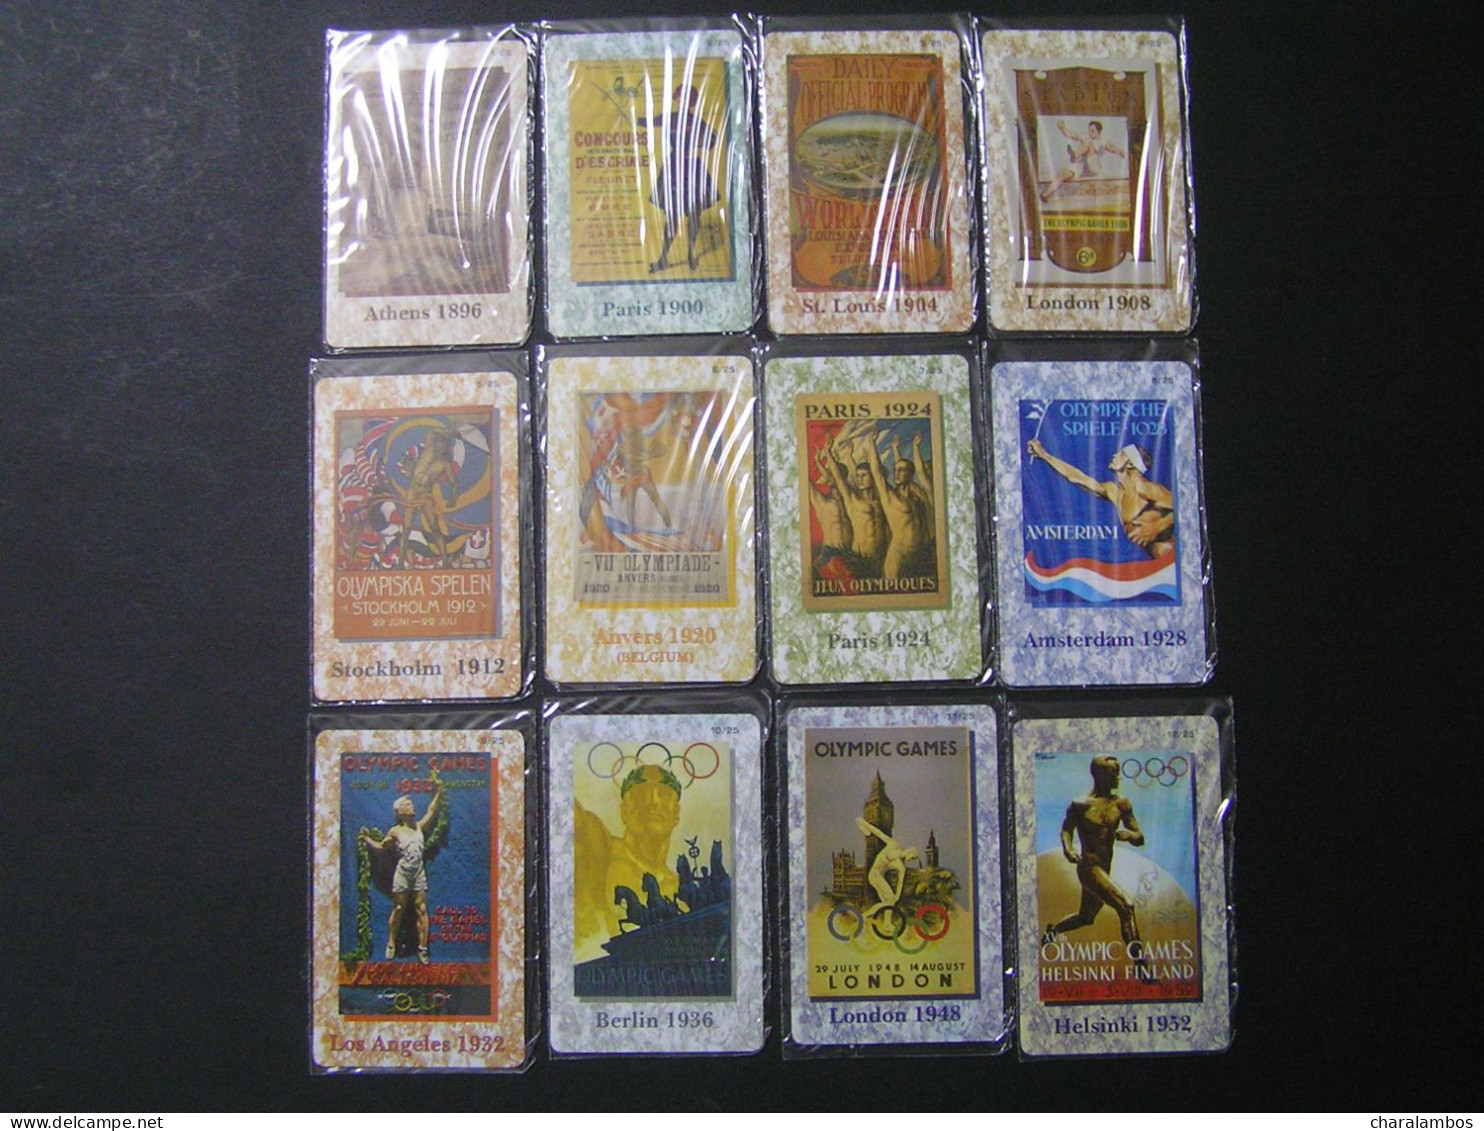 GREECE OLYMPIADS 1896-2004 25 Collectors Telephone Cards DVD ANCIENT OLYMPIA Birthplace Of The Olympic Games Folder Mind - Giochi Olimpici